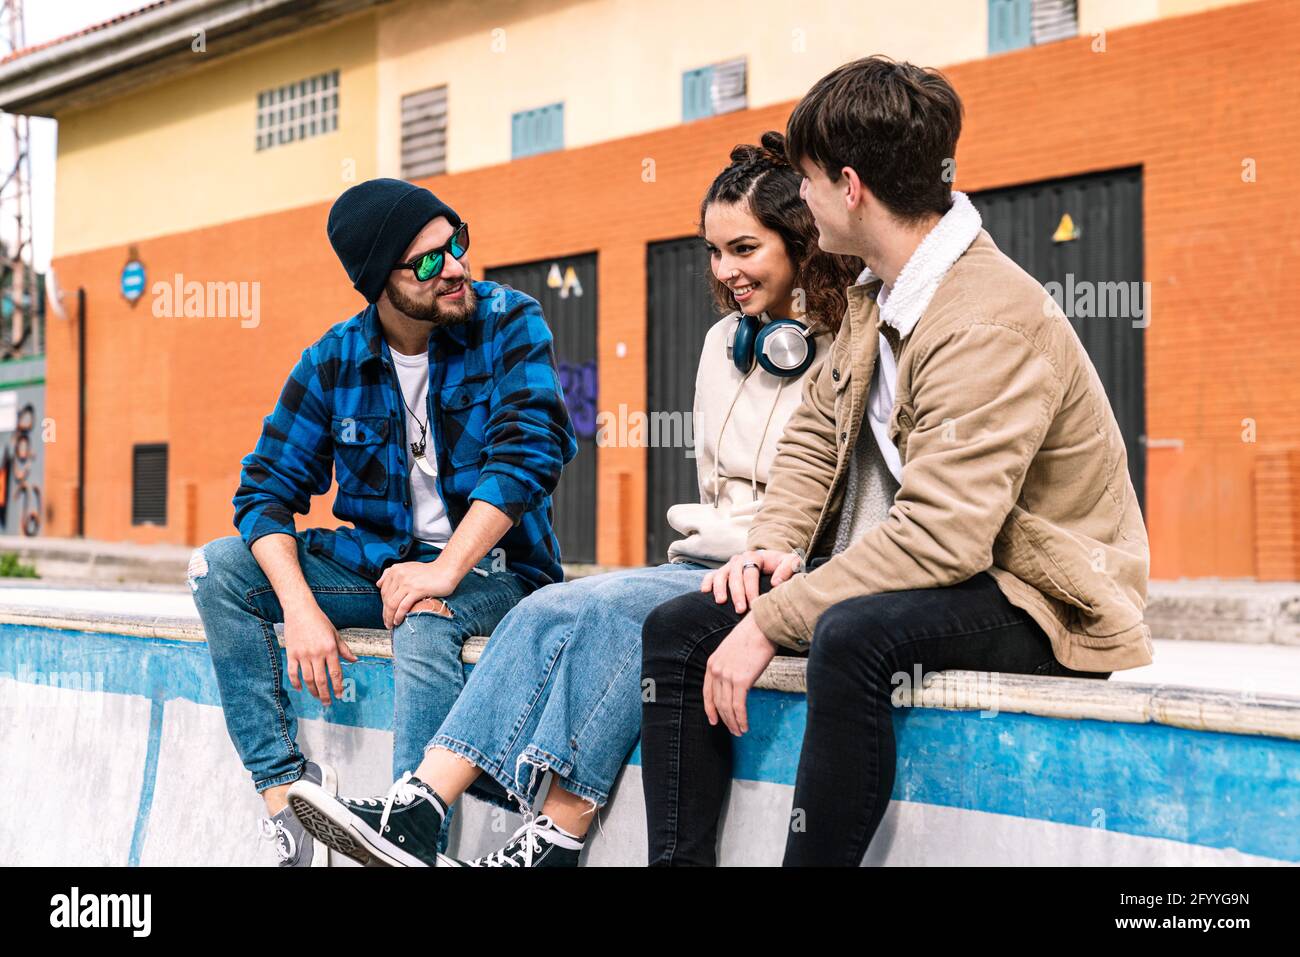 Cheerful friends speaking with each other and smiling on concrete parapet near brick building Stock Photo